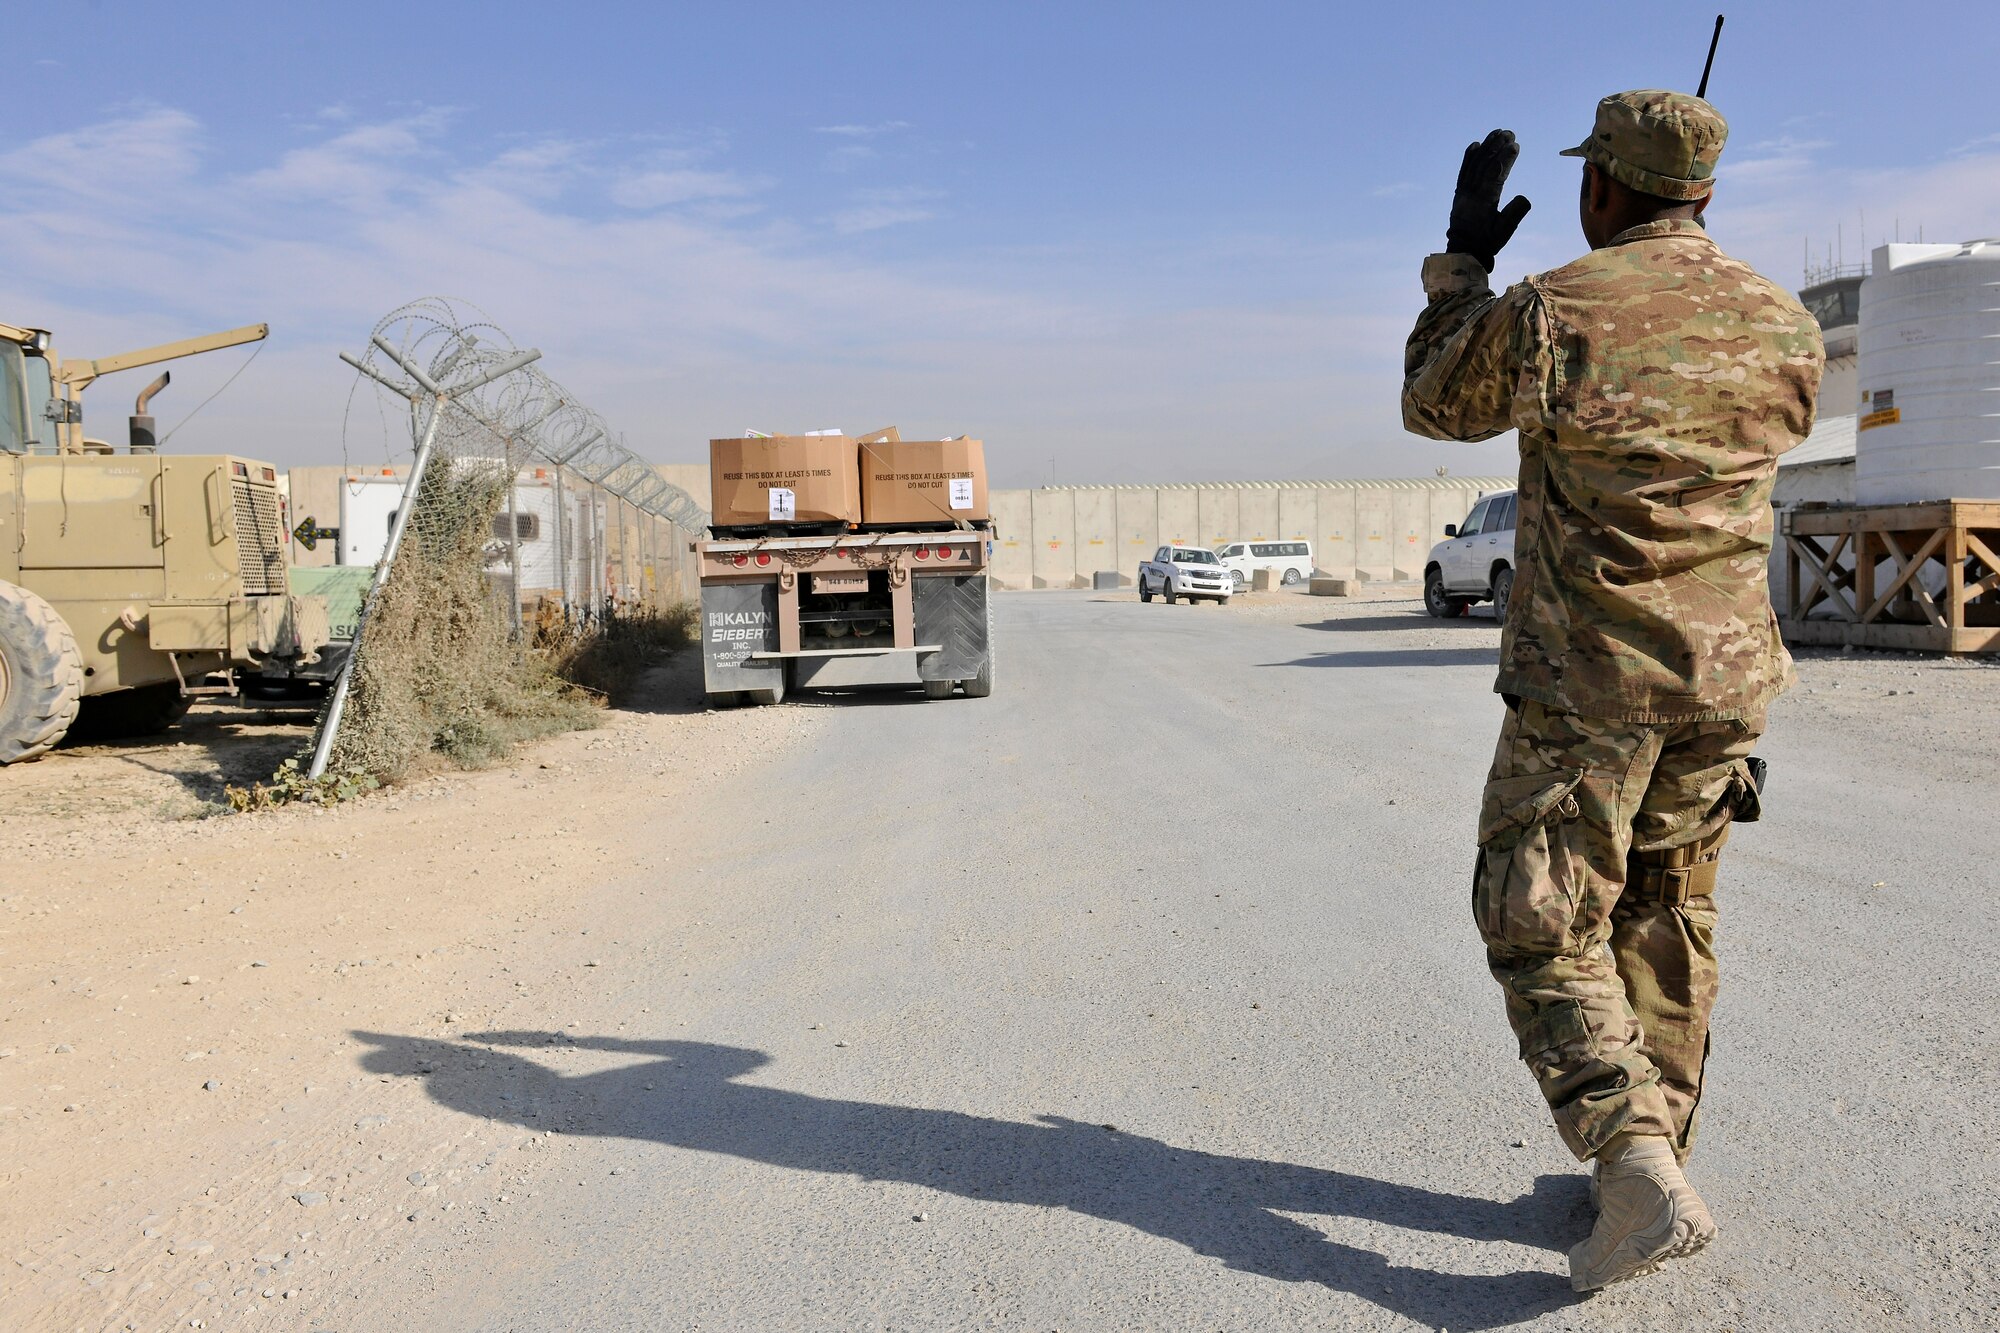 Senior Airman Krishan Narain, a member of the 455th Expeditionary Knowledge Operations Management office, guides a flatbed truck loaded with 24 pallets full of mail at Bagram Airfield, Afghanistan, Nov. 15, 2012.  More than 180,000 pounds of mail are sent to BAF personnel per month but averages will reach nearly 300,000 pounds during the holiday season. (U.S. Air Force photo/Senior Airman Chris Willis)